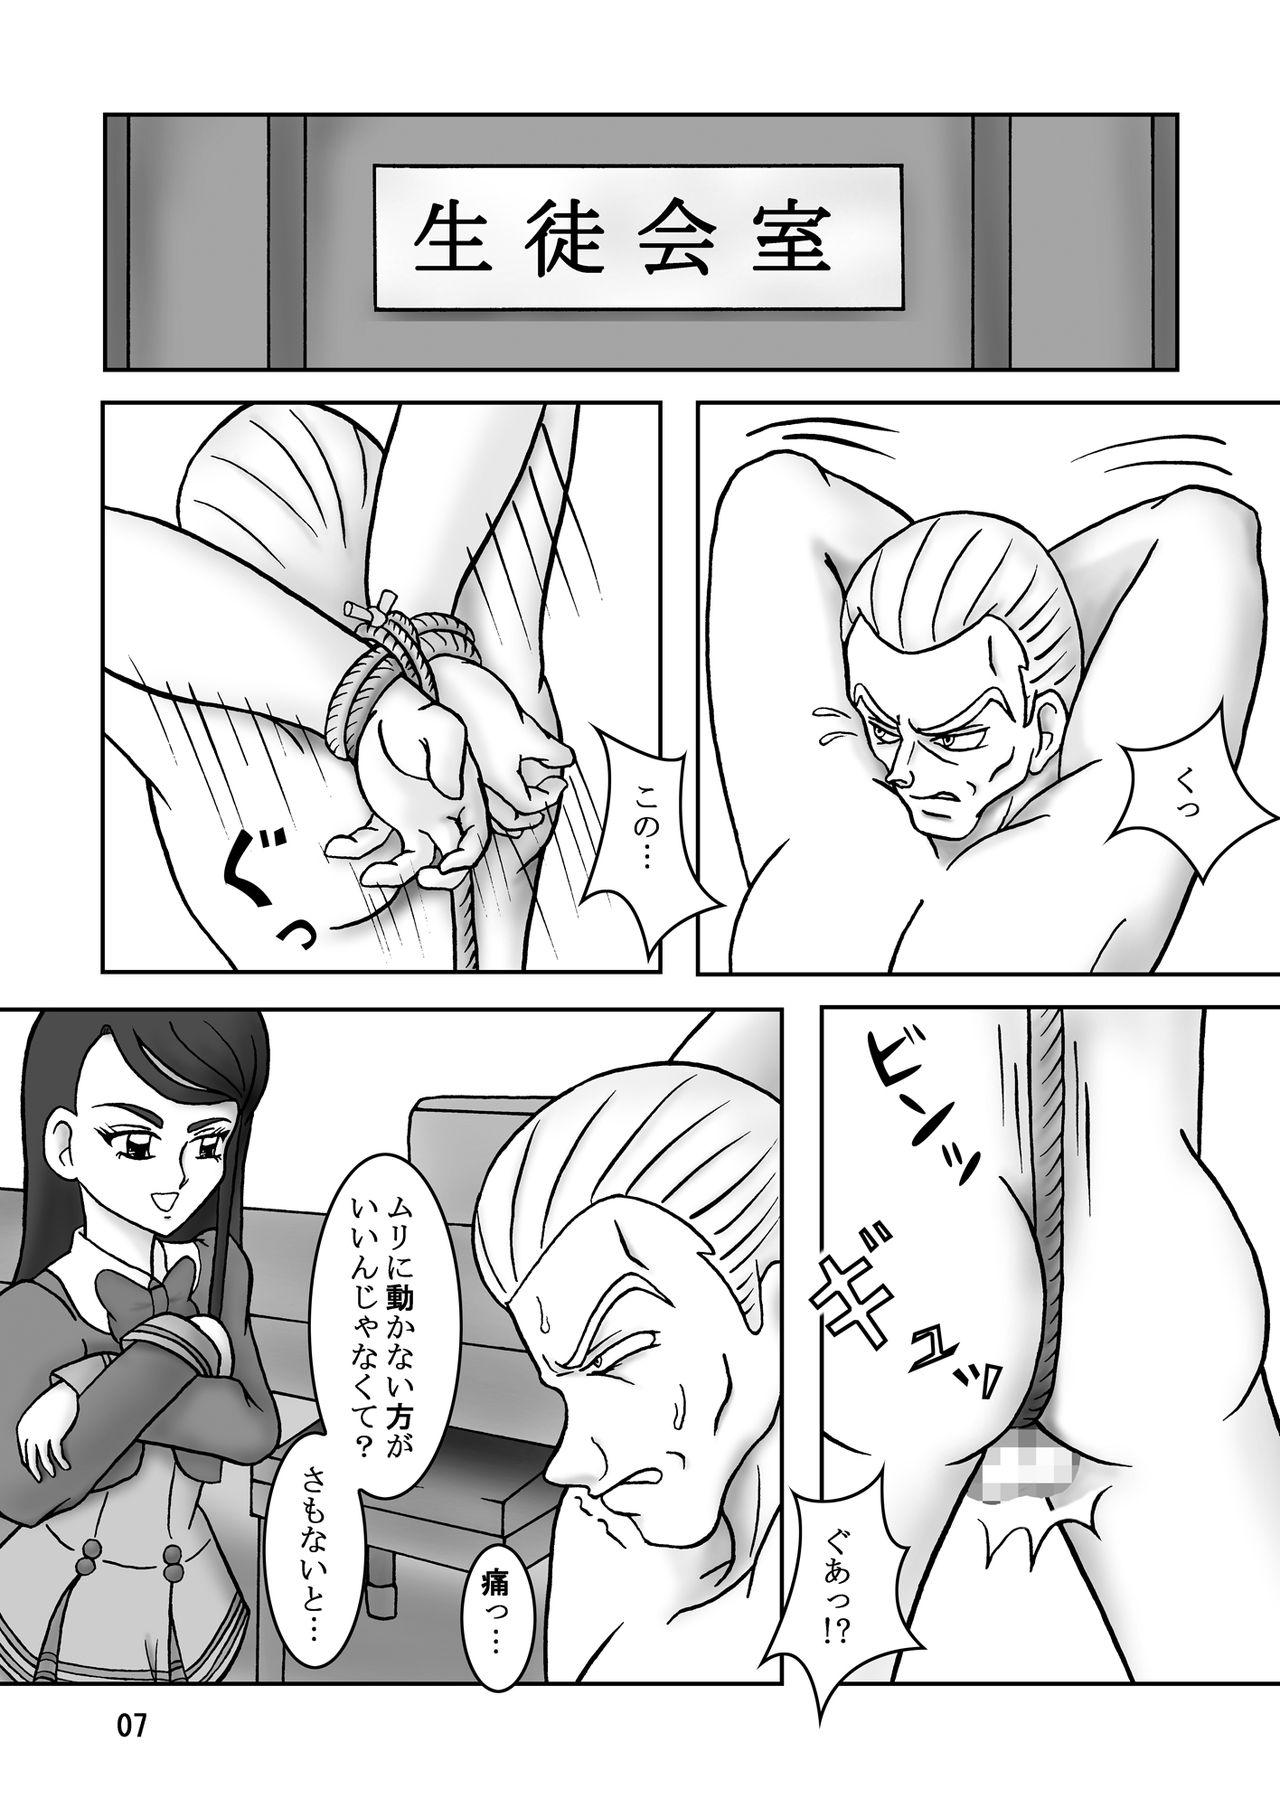 Girl Get Fuck Yes！ズリキュア5 - Yes precure 5 Hardcore Sex - Page 9